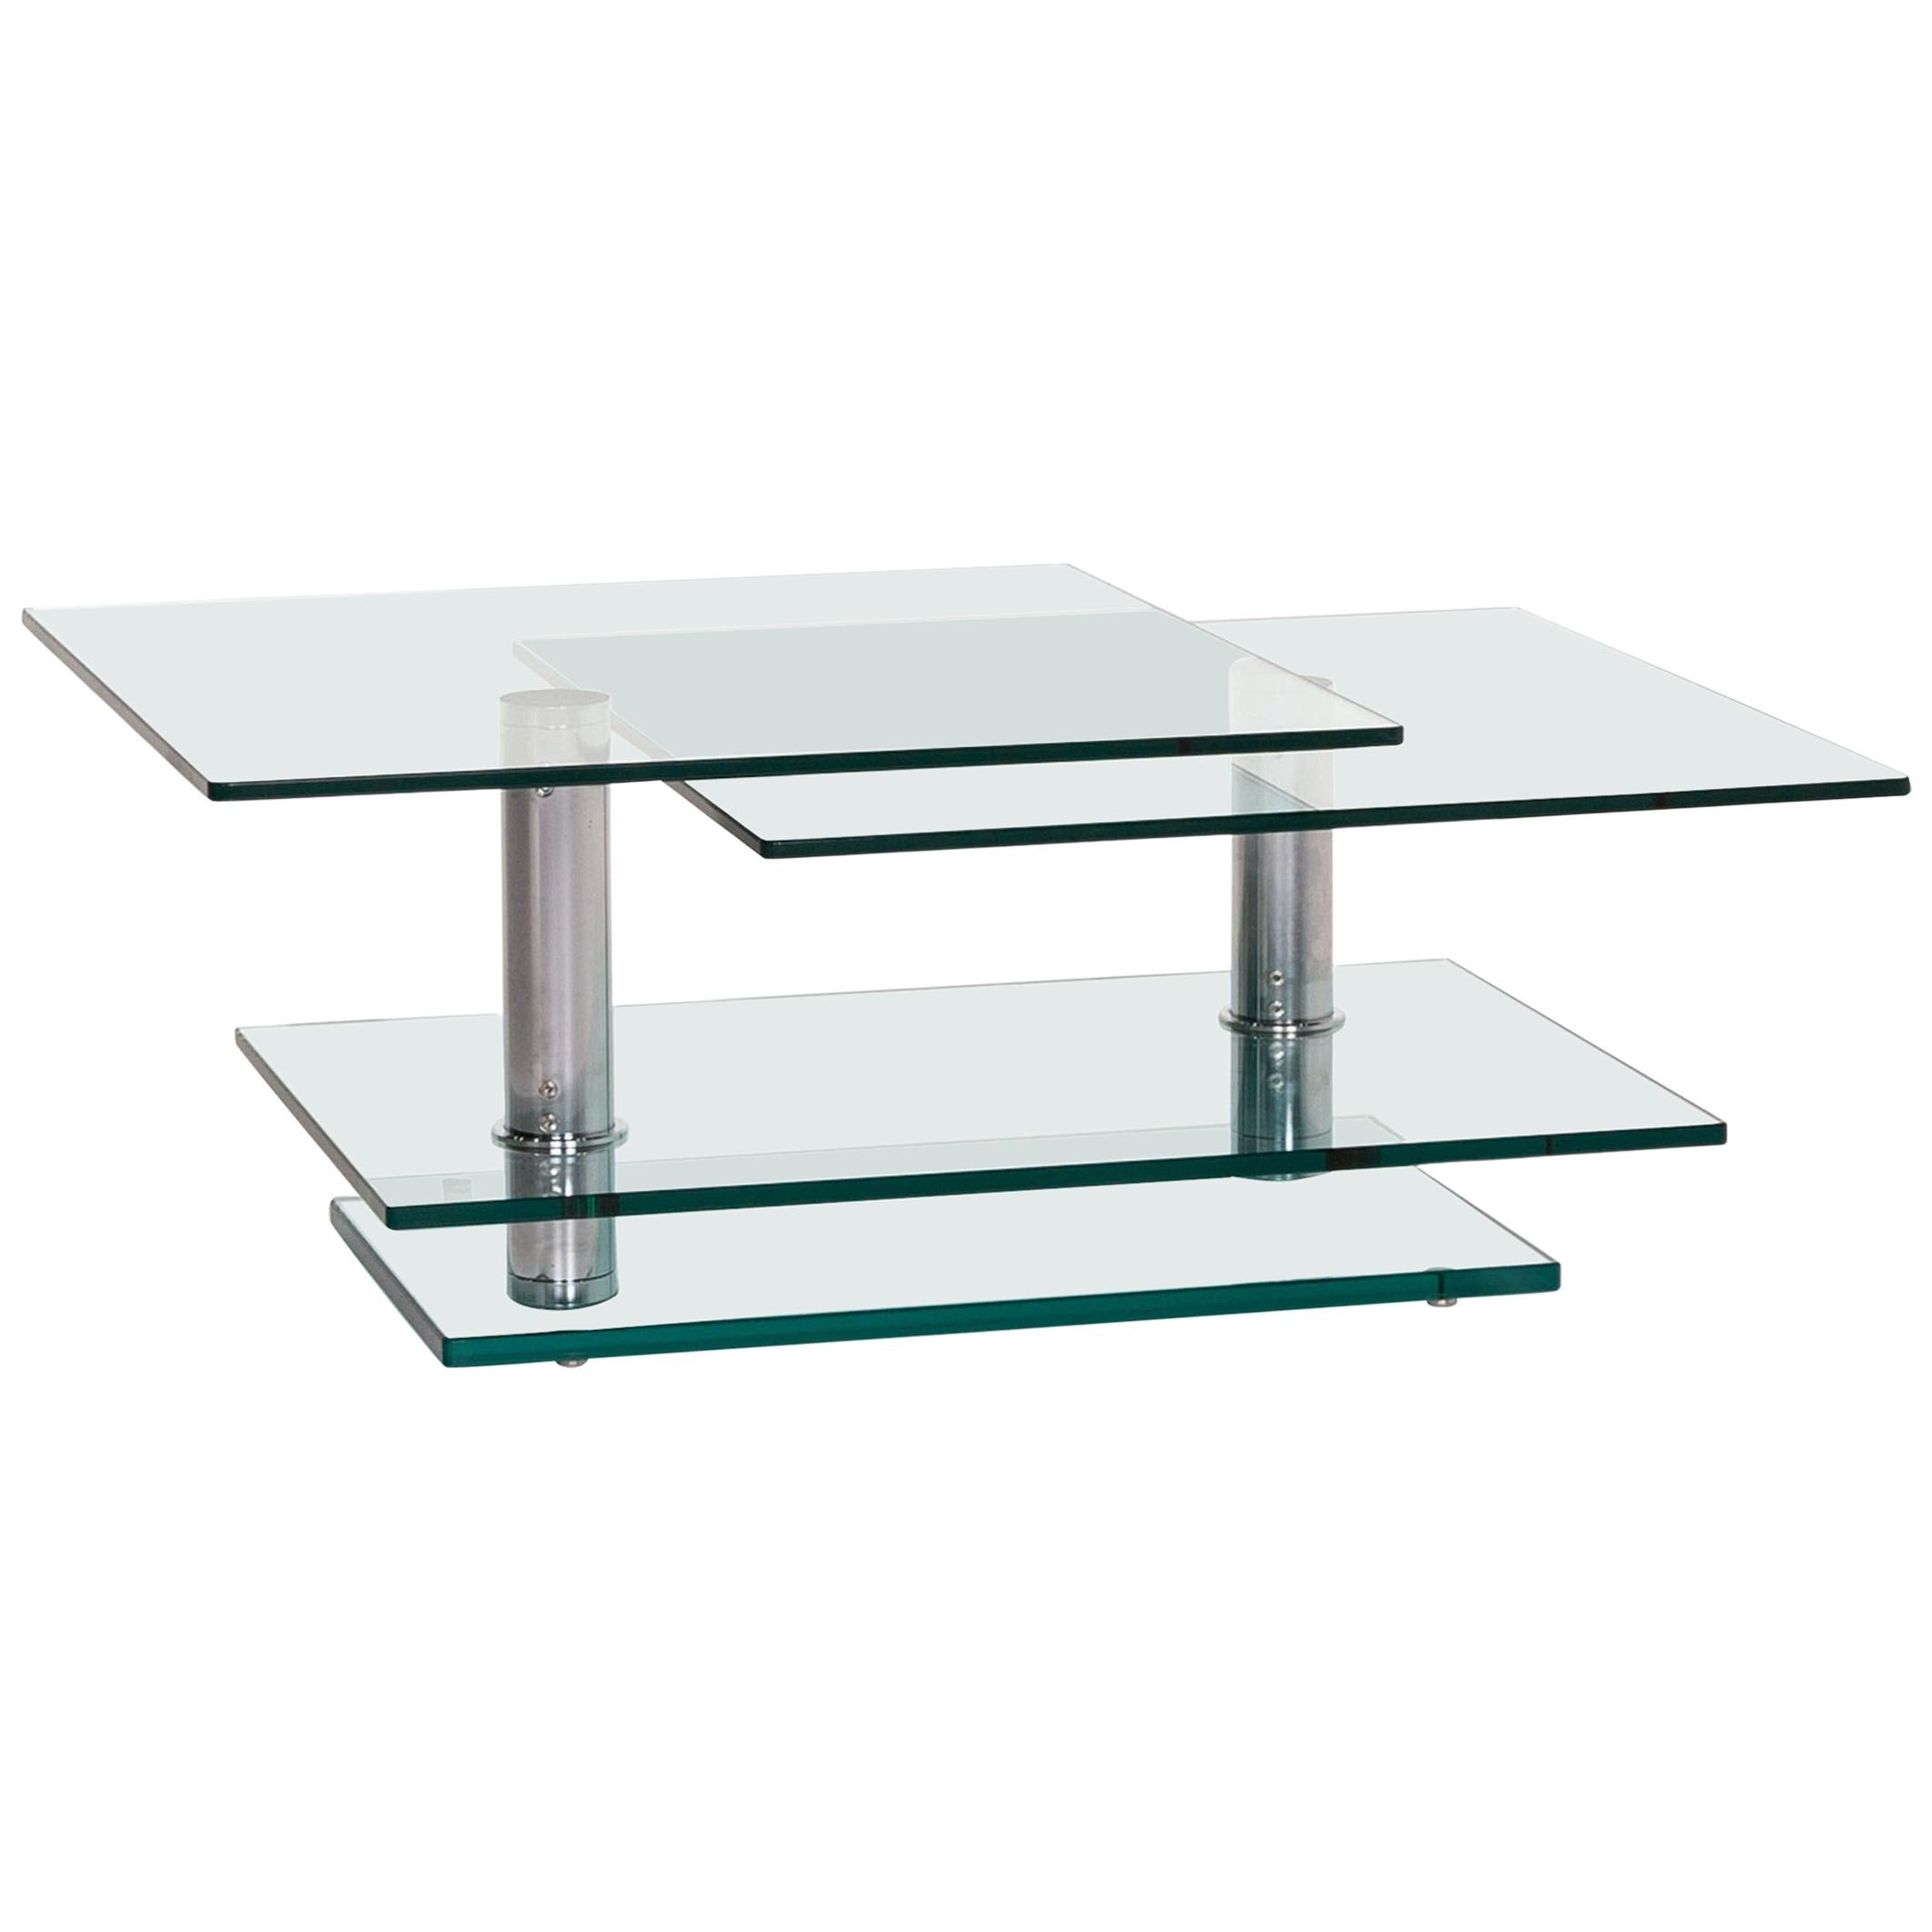 Ronald Schmitt K 500 Glass Coffee Table Metal Table Function Adjustable For Sale